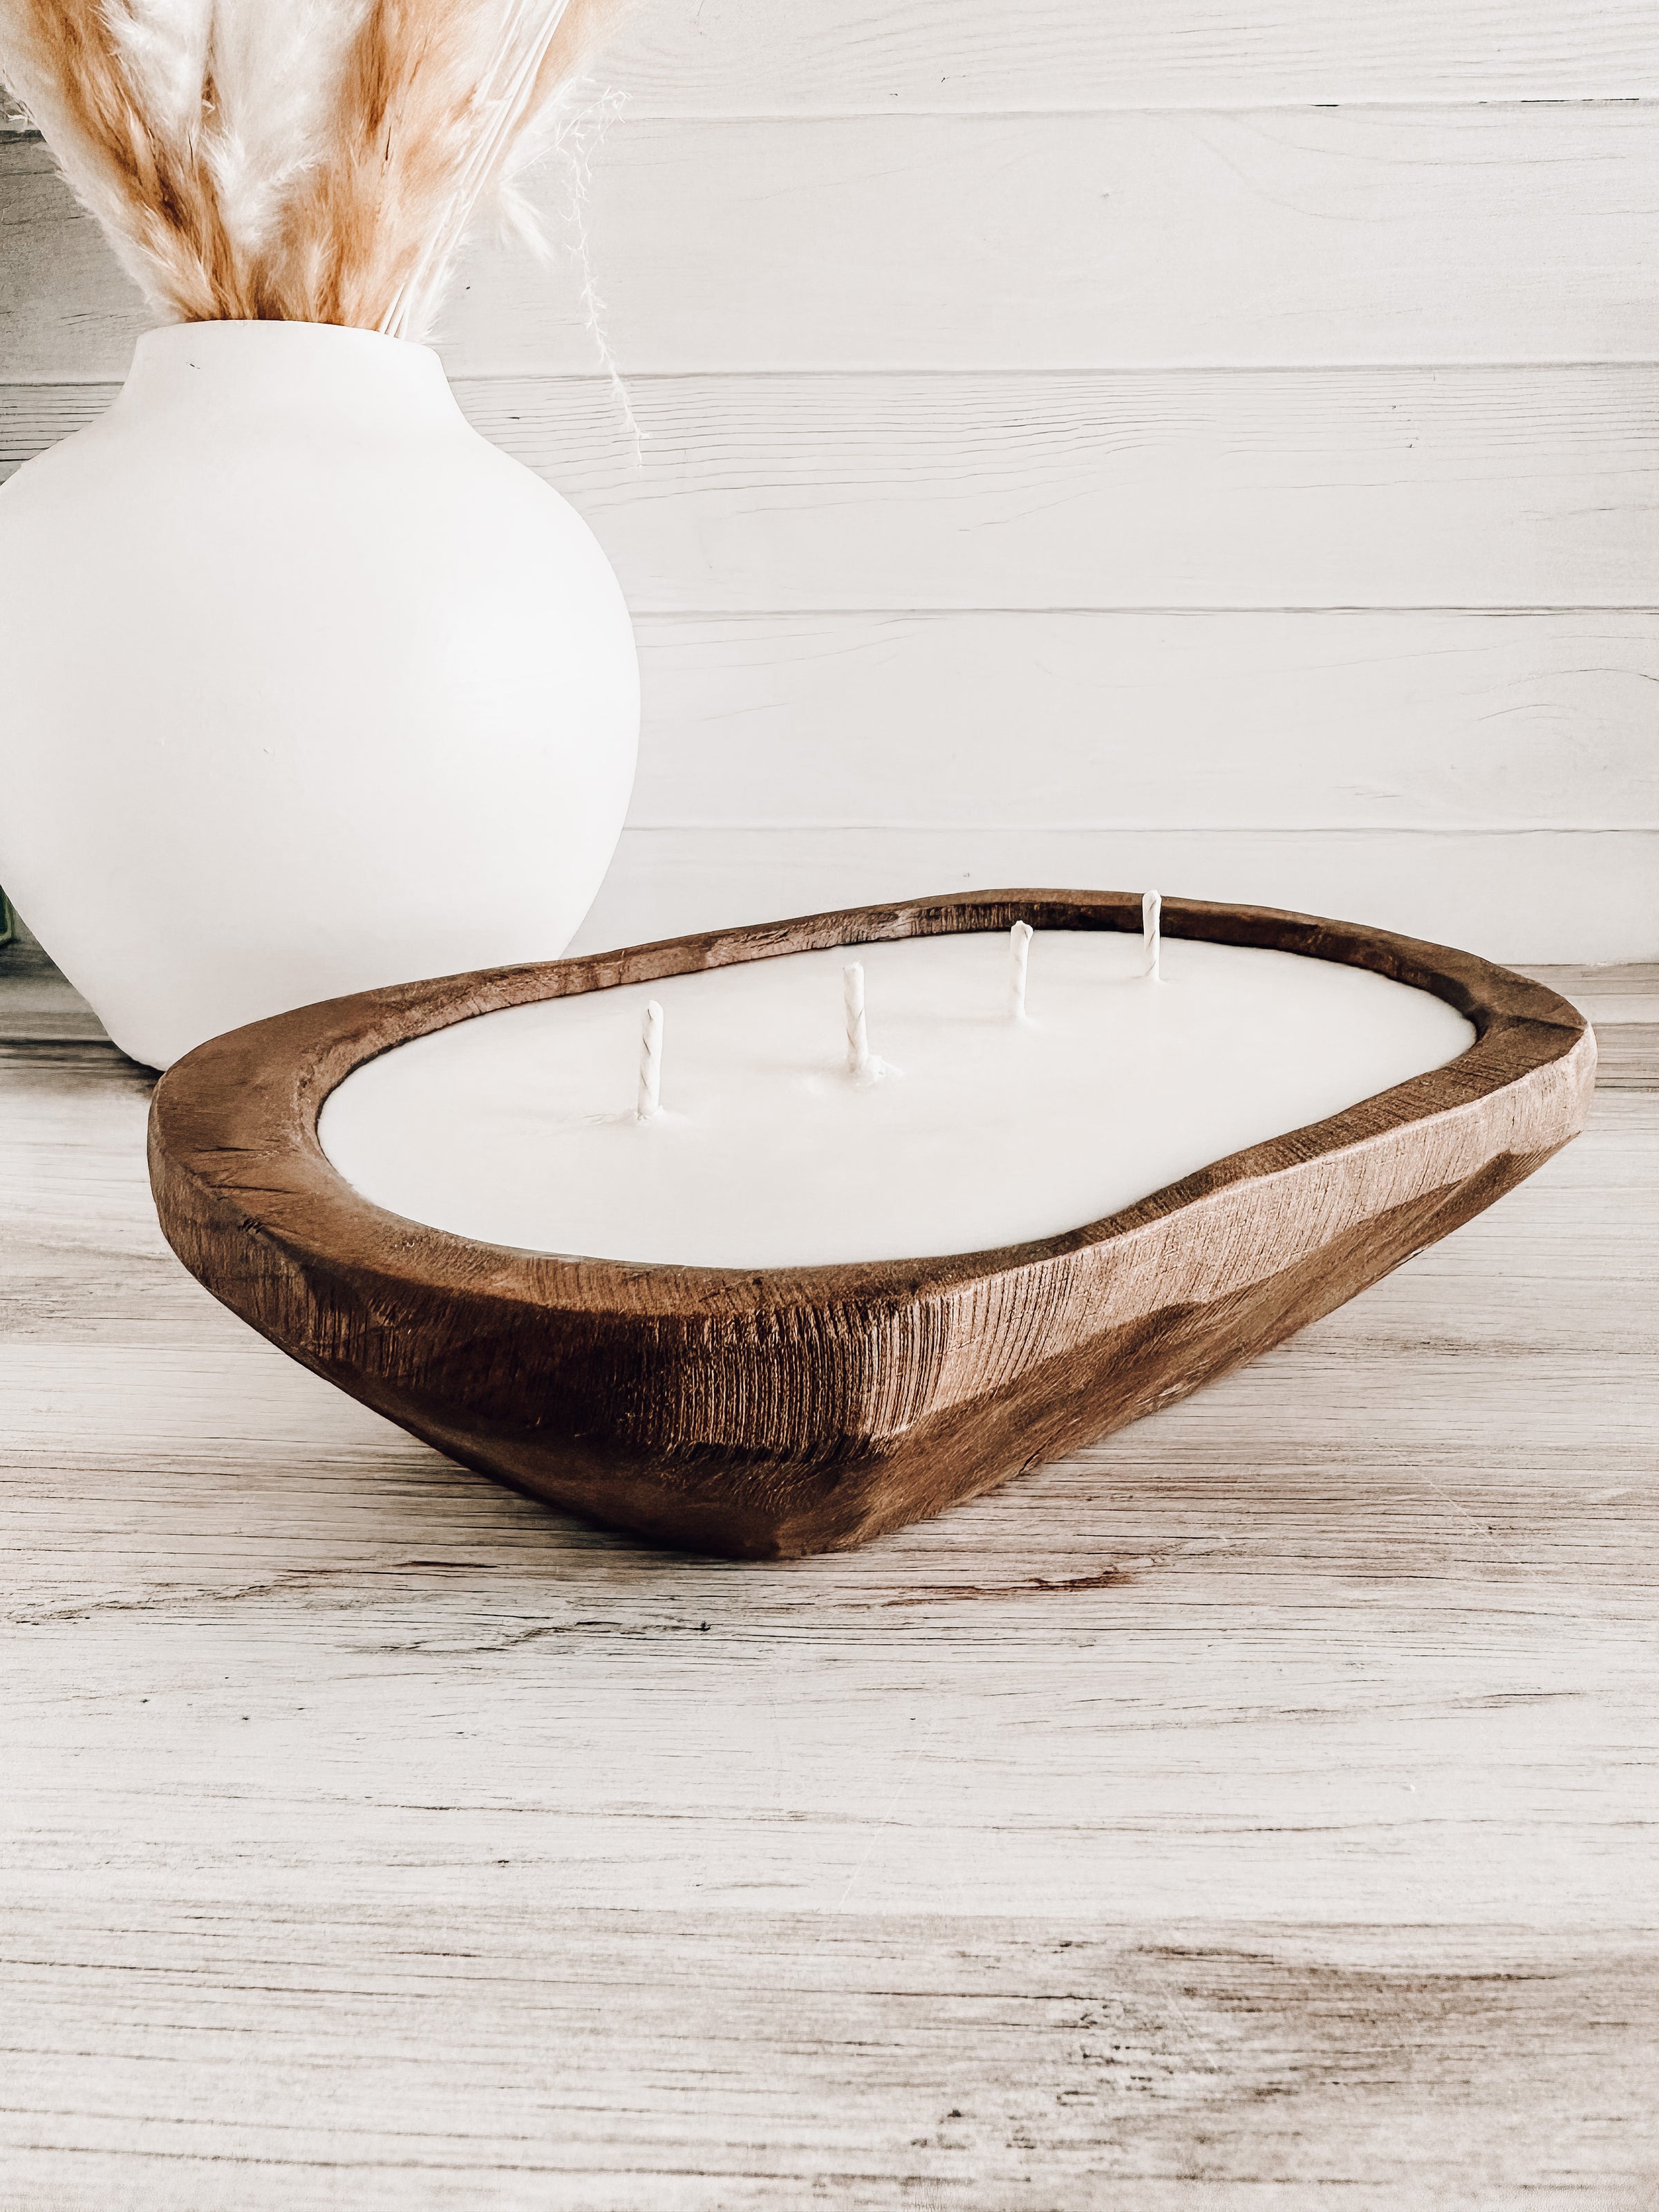 Wholesalecandle Ready 6 Wick 18 Brown Dough Bowls Set of 5 Hand Carved Wood  Bowl Rustic Home Decor for Candle Making Farmhouse 